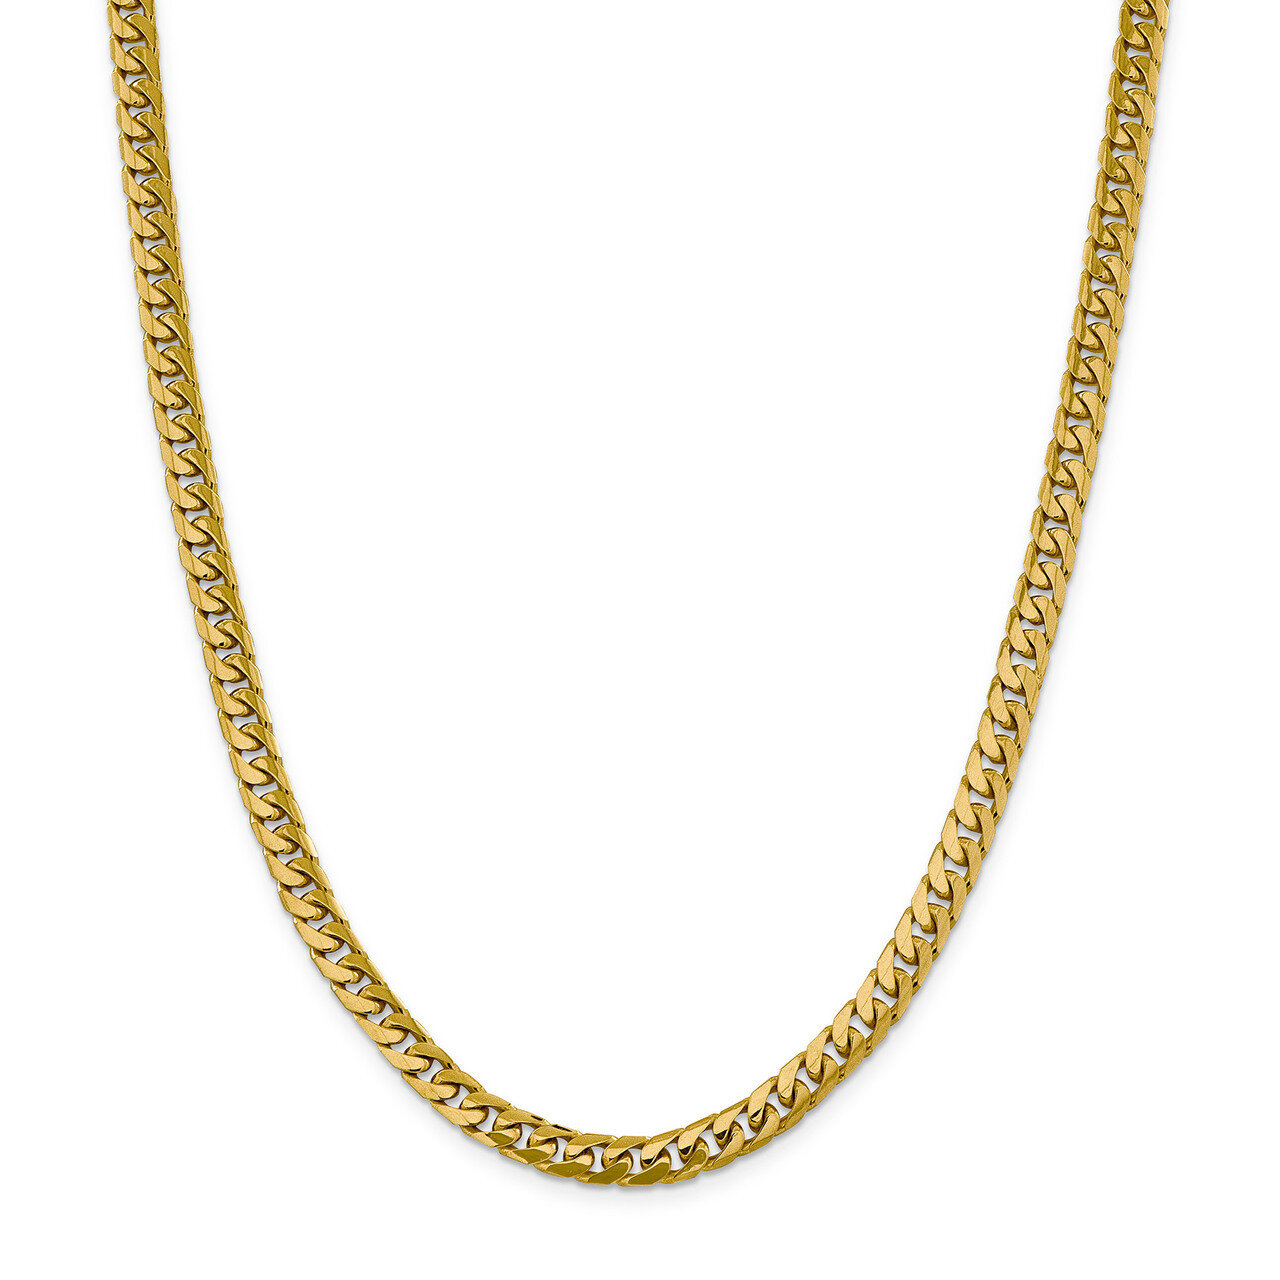 26 Inch 6.25mm Domed Curb Chain 14k Gold DCU200-26